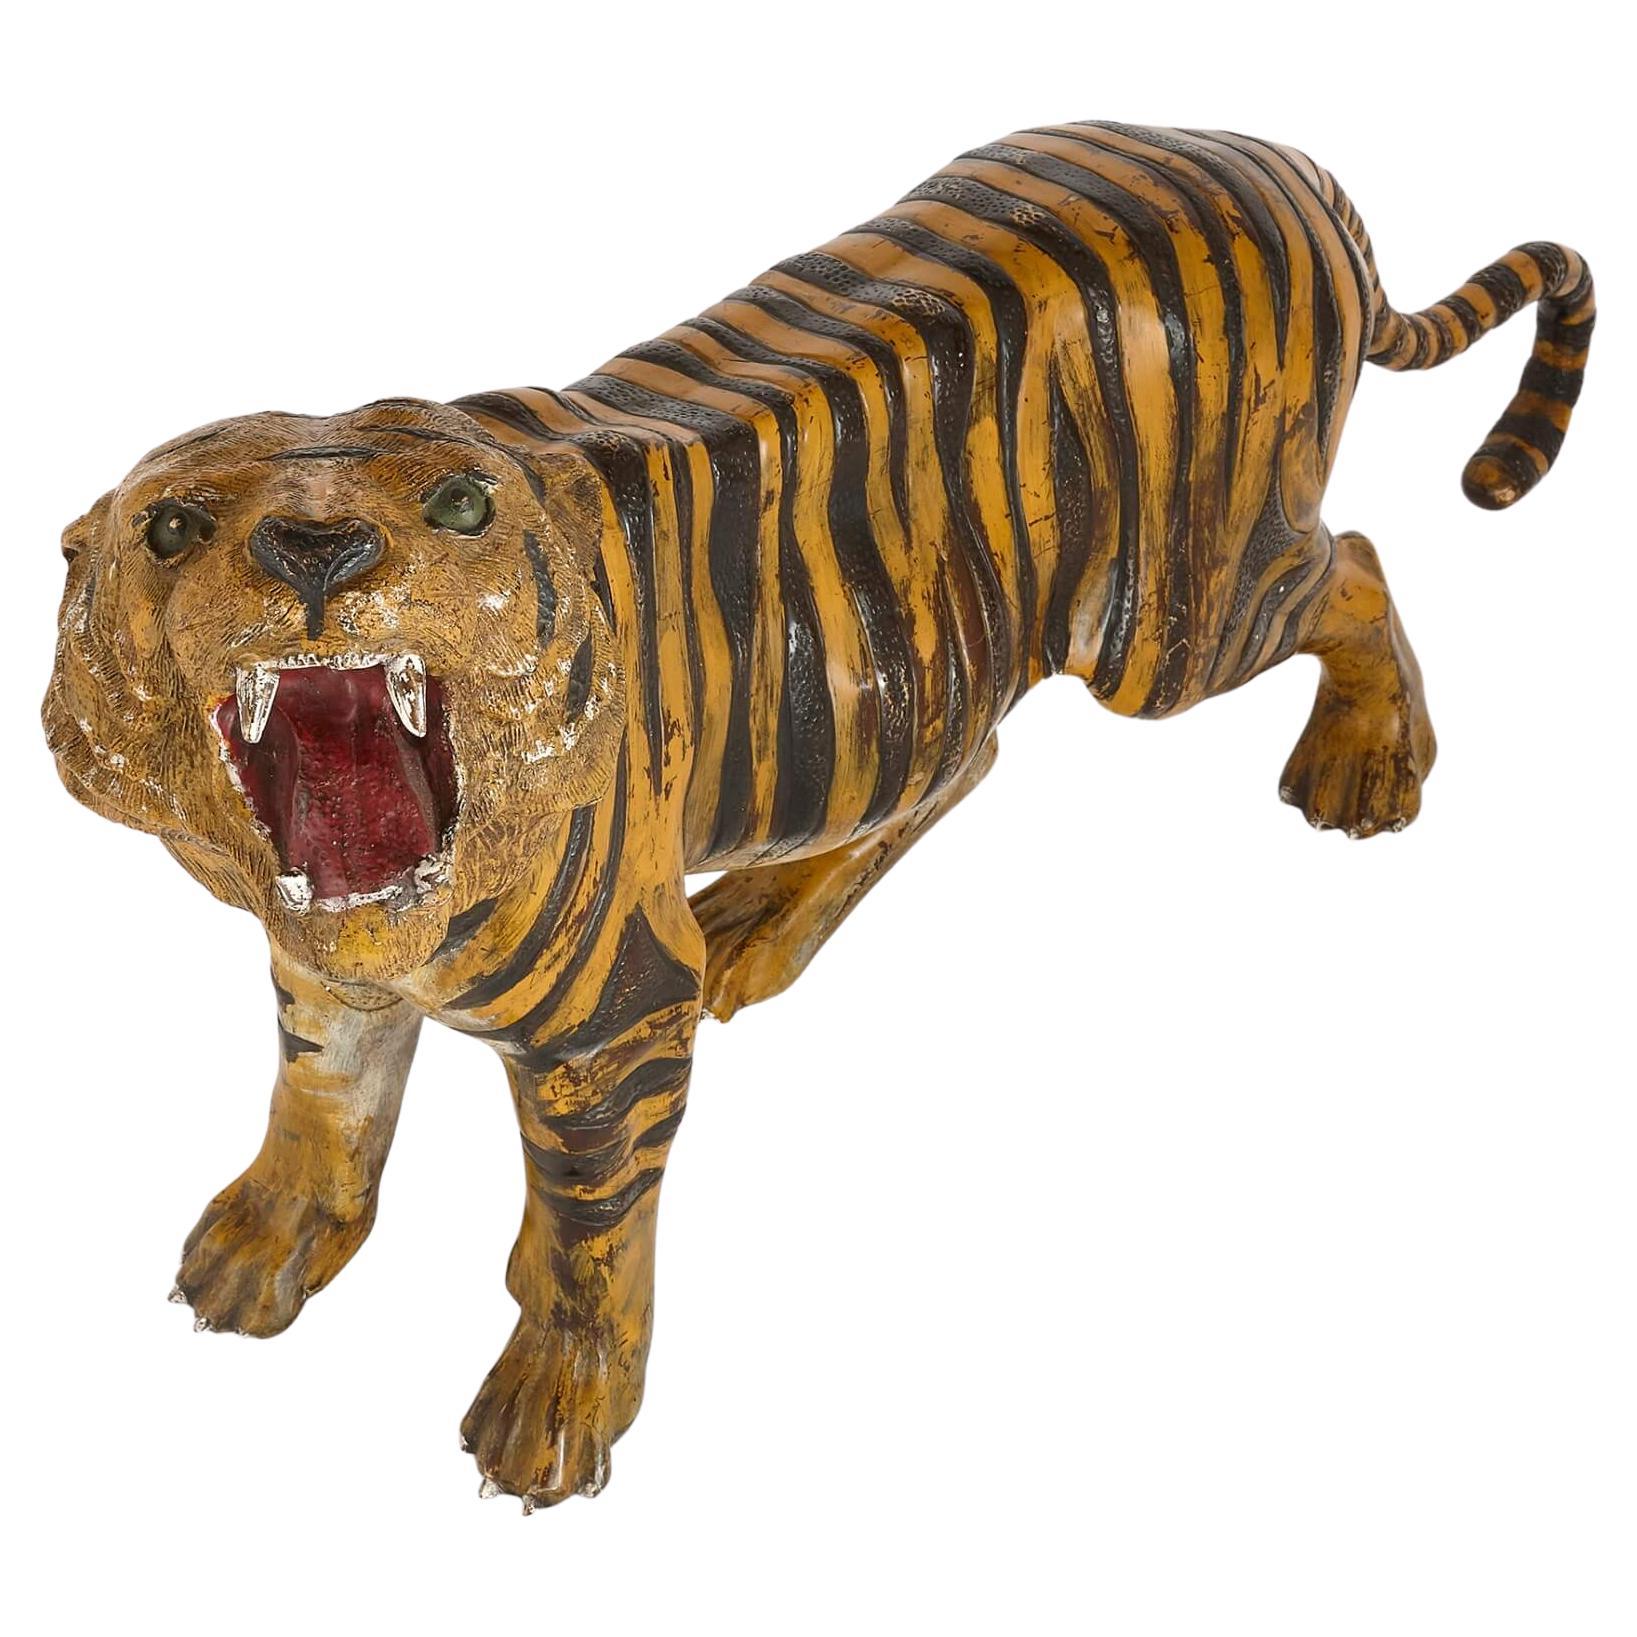 This striking monumental bronze tiger was produced in Vienna around the turn of the twentieth century in the popular cold-painted bronze technique. Whereas most examples of this theme are miniatures around 15cm in length, this colossal example at